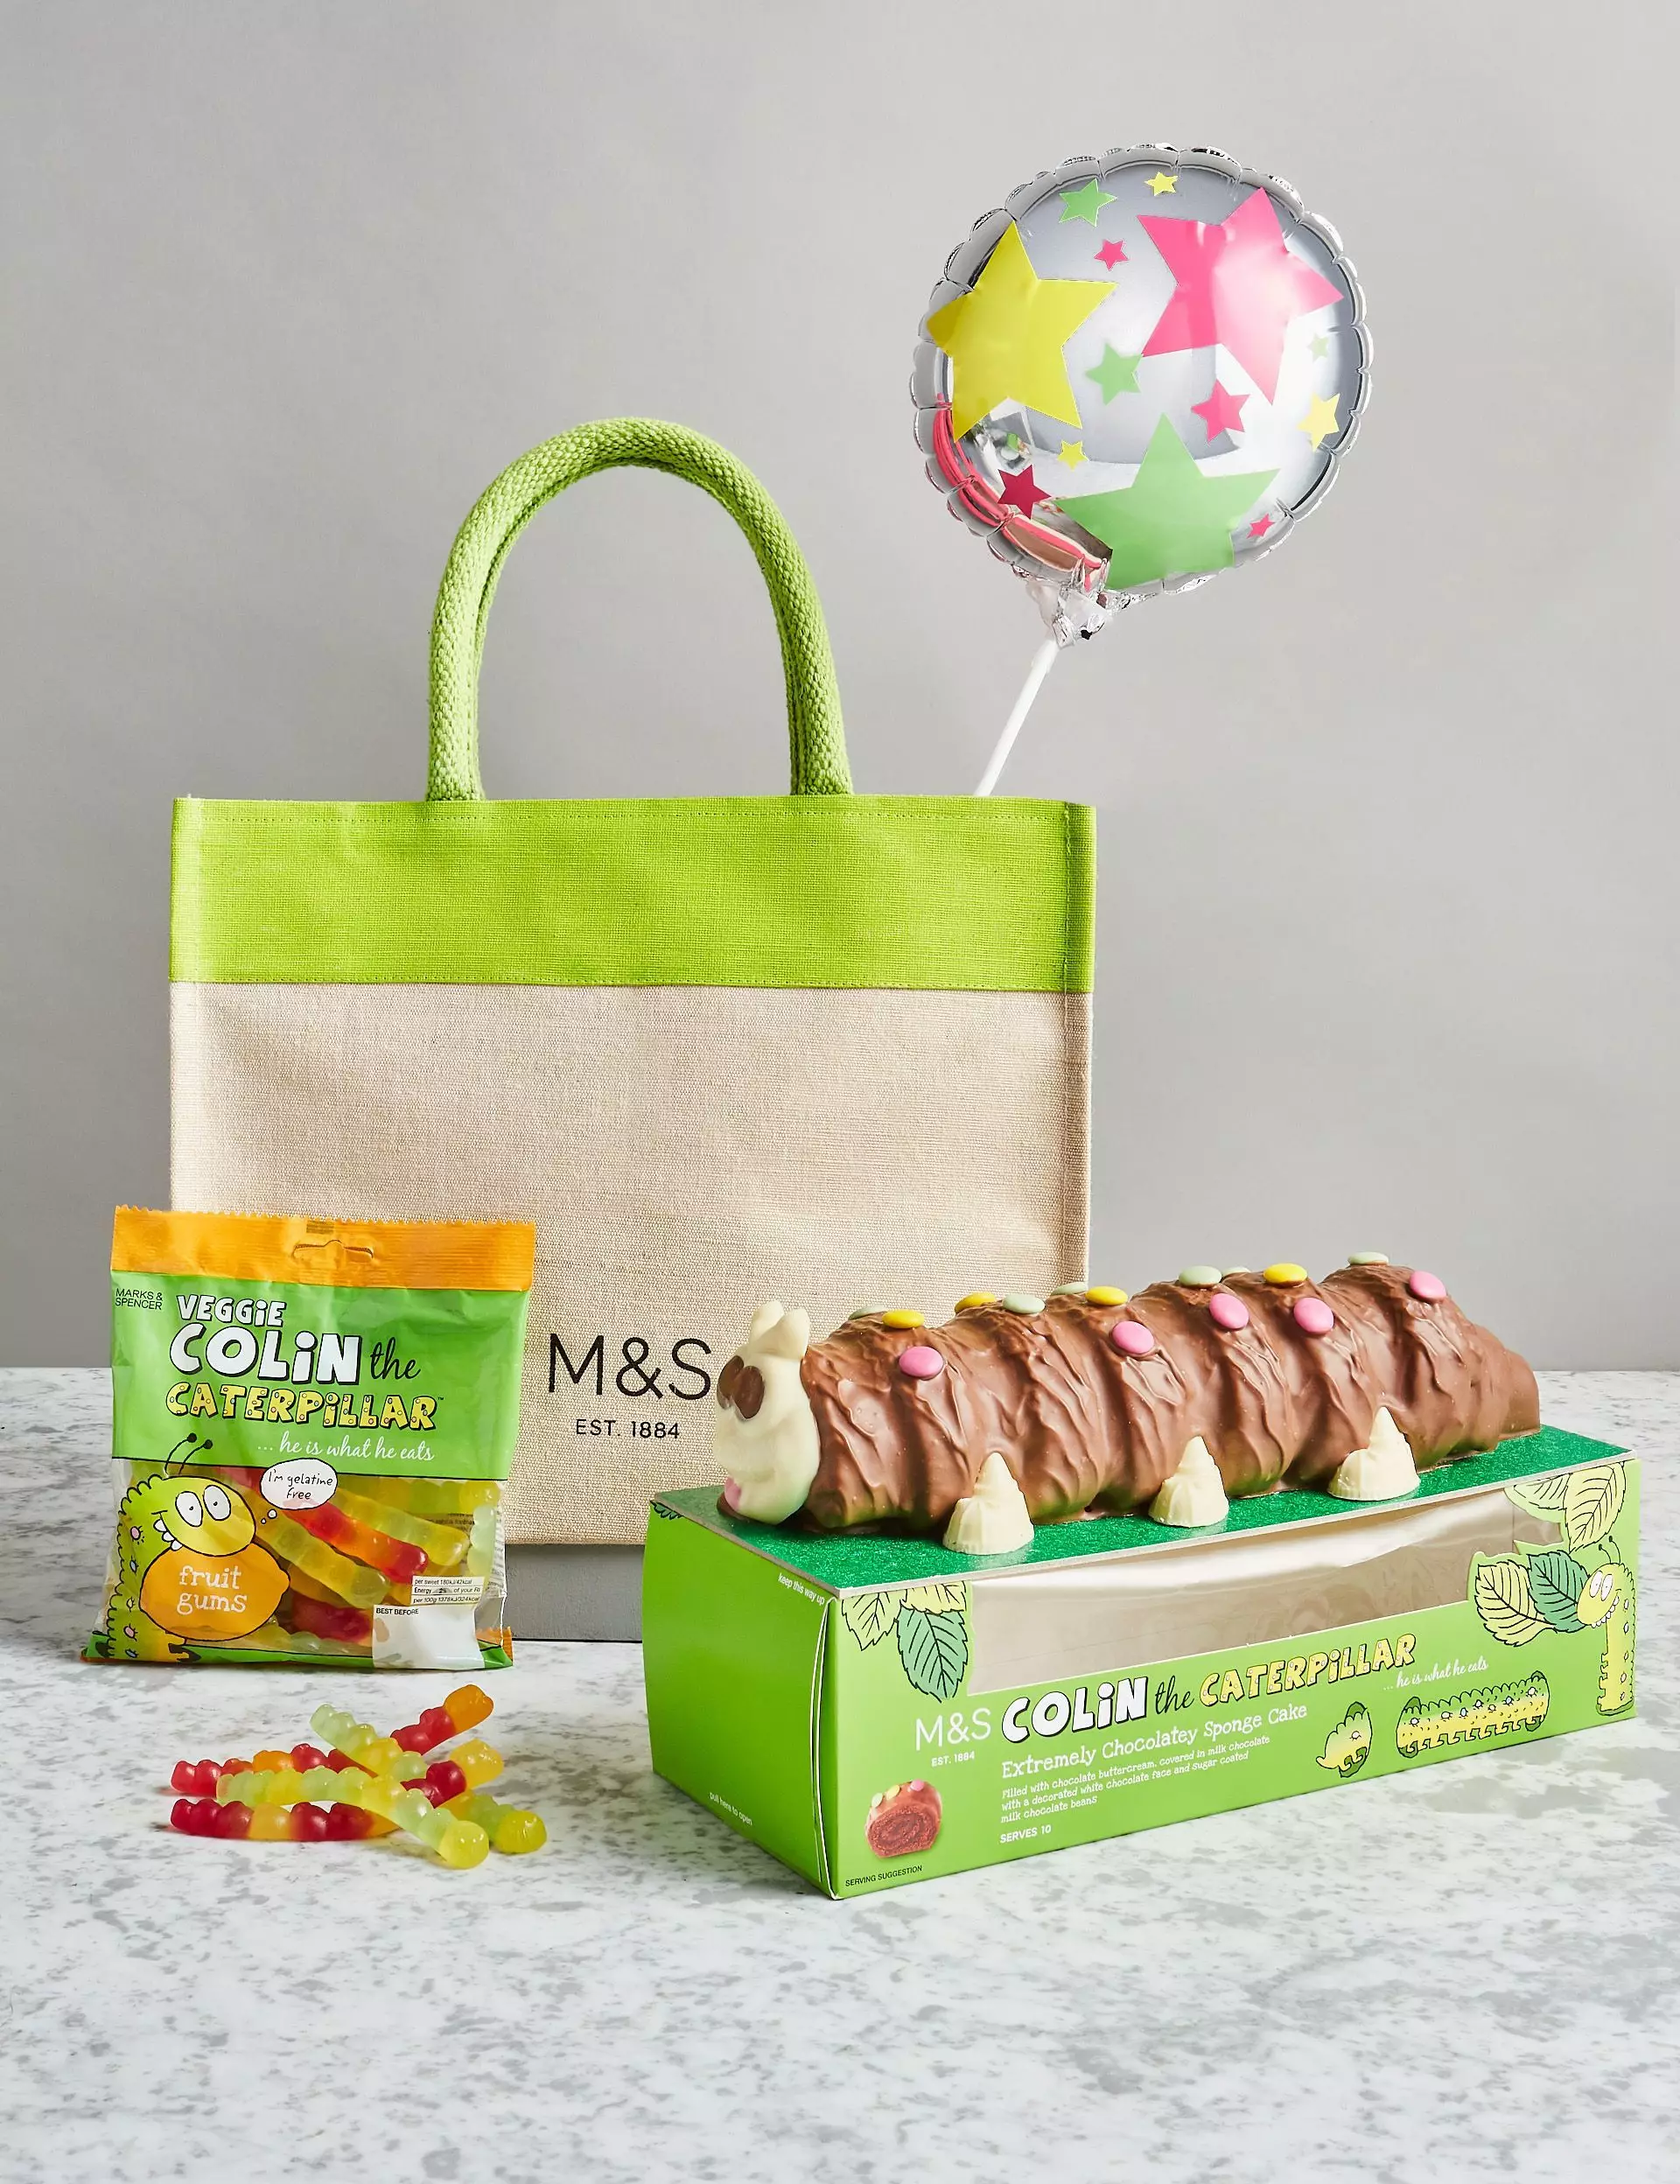 Colin the Caterpillar has always been a birthday favourite (